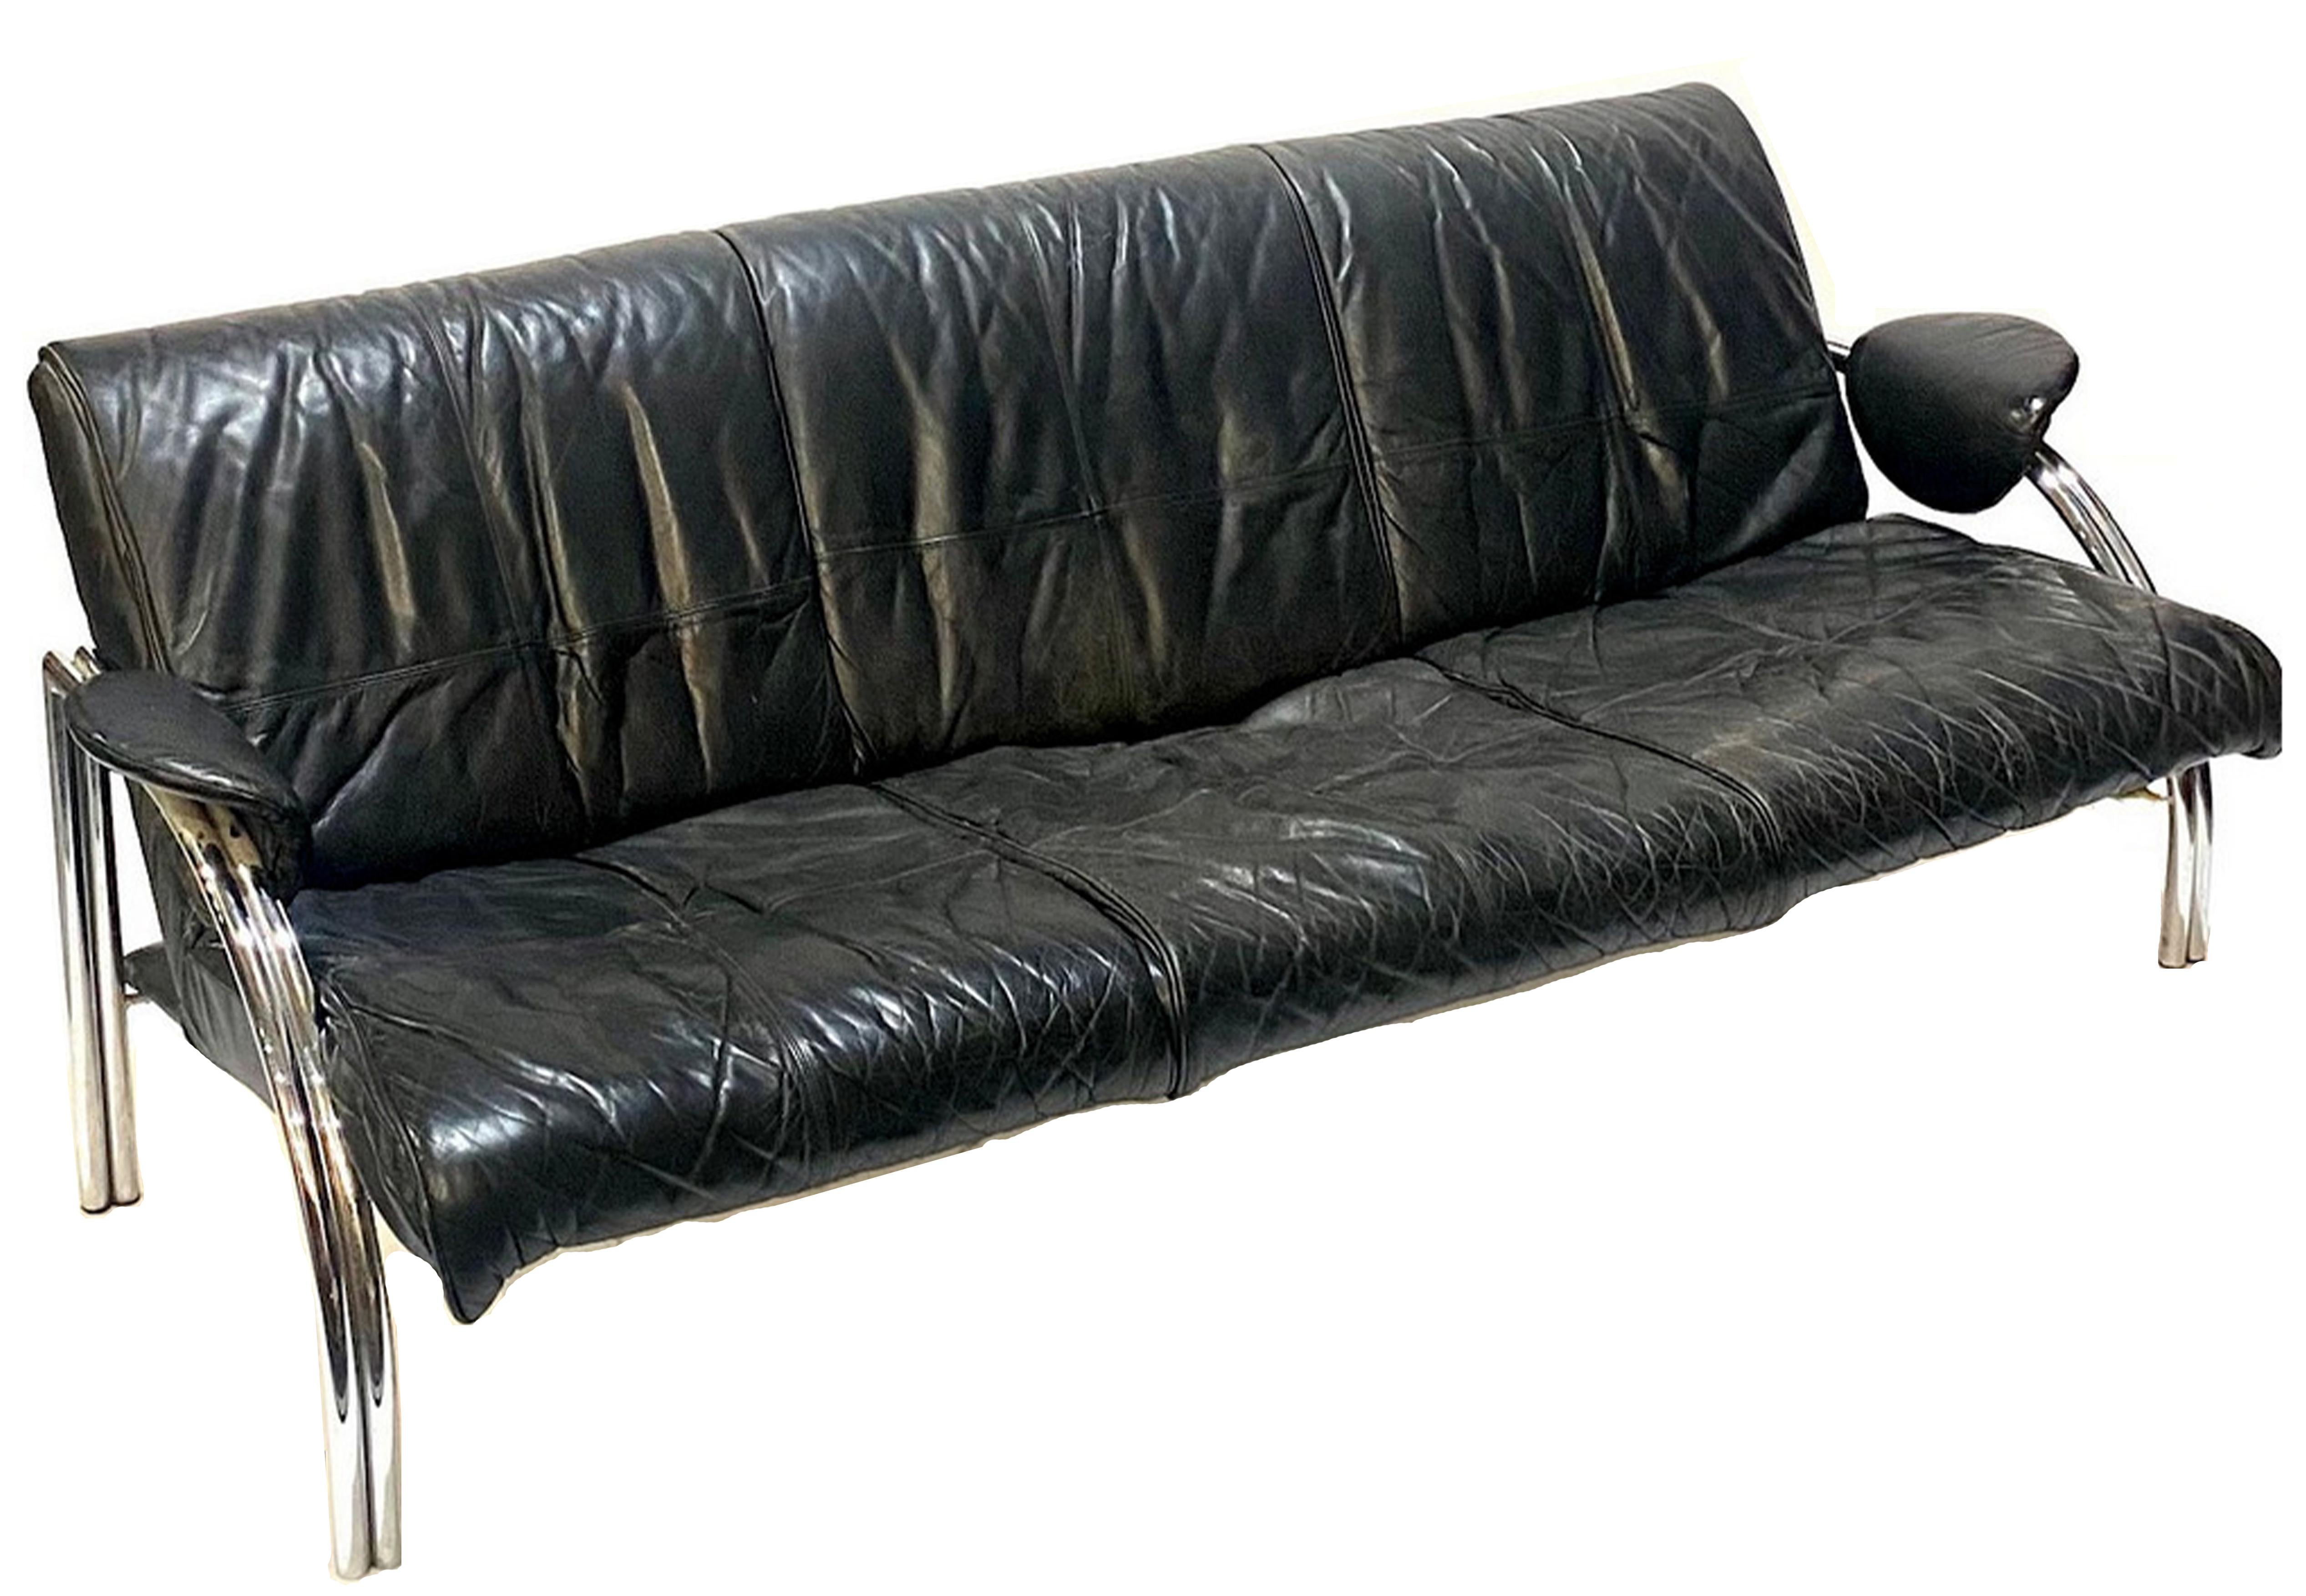 A Rare Pieff & Co Art Deco Style Black Leather & Chromium Plated Tubular Steel Framed Three Seater Sofa 1970's Designed by Mark Lawson

Extra images of original sketches, not supplied with the sofa. 